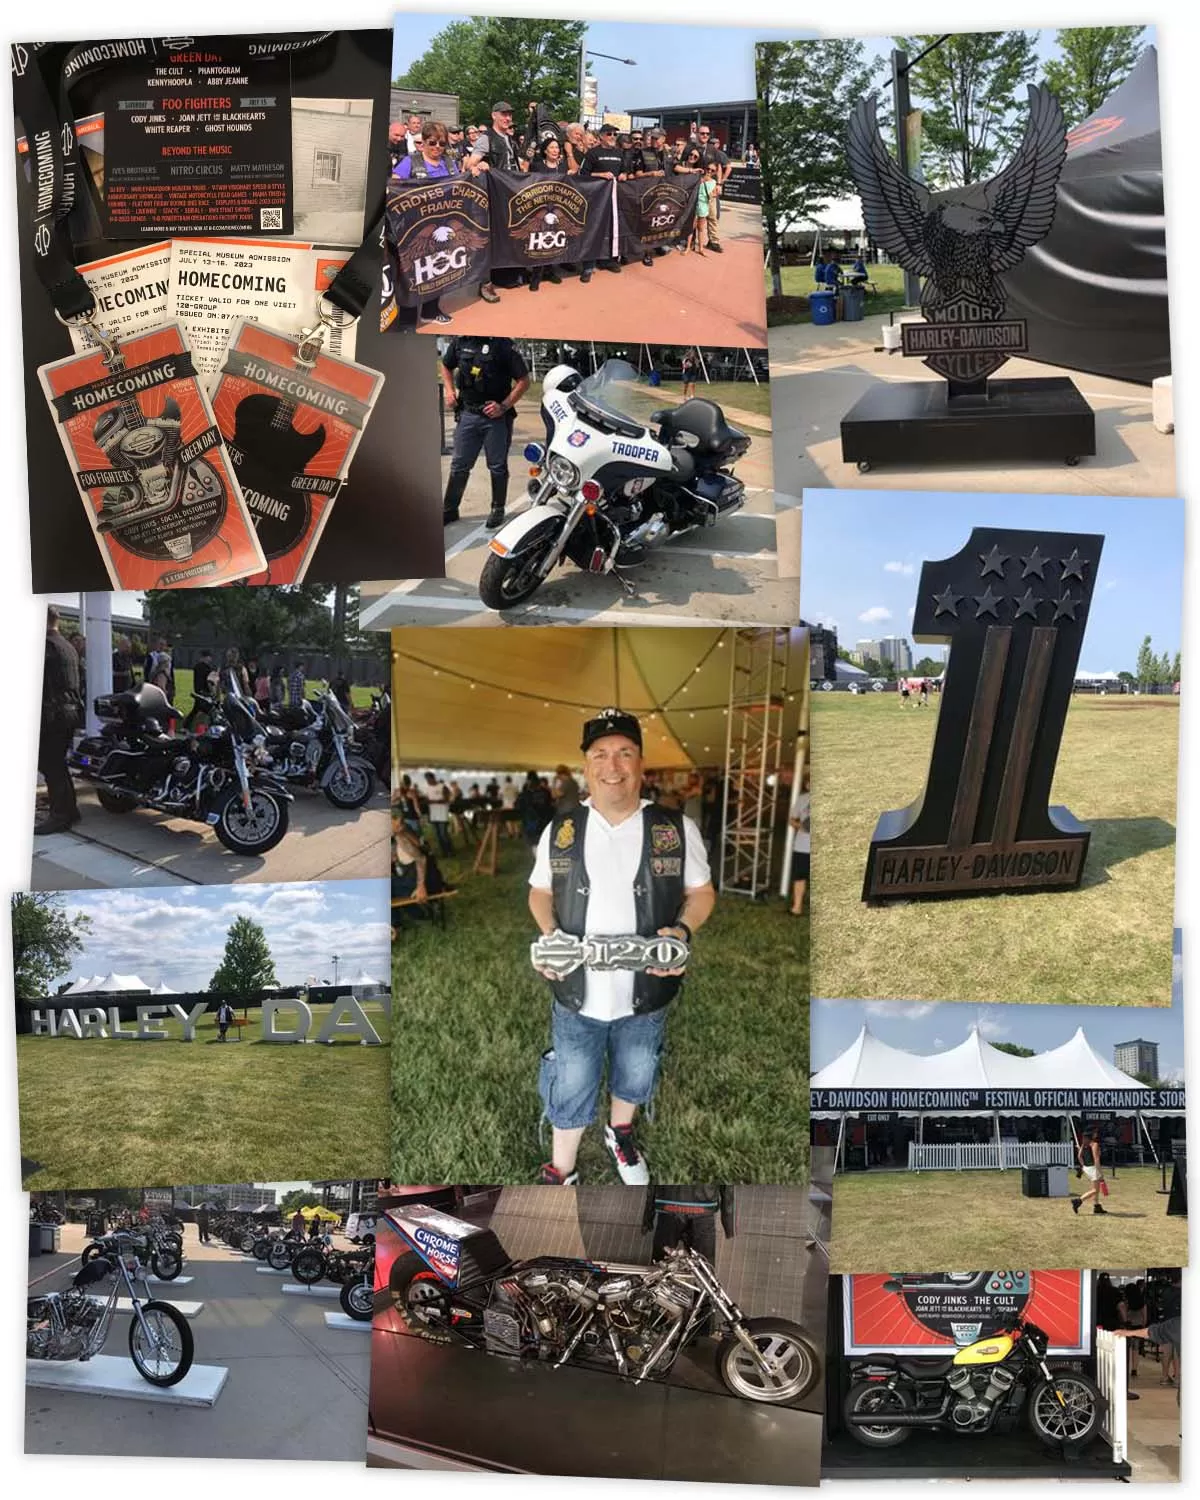 Michael wins tickets to go to the Harley-Davidson® 120th Anniversary Homecoming Celebrations in Milwaukee